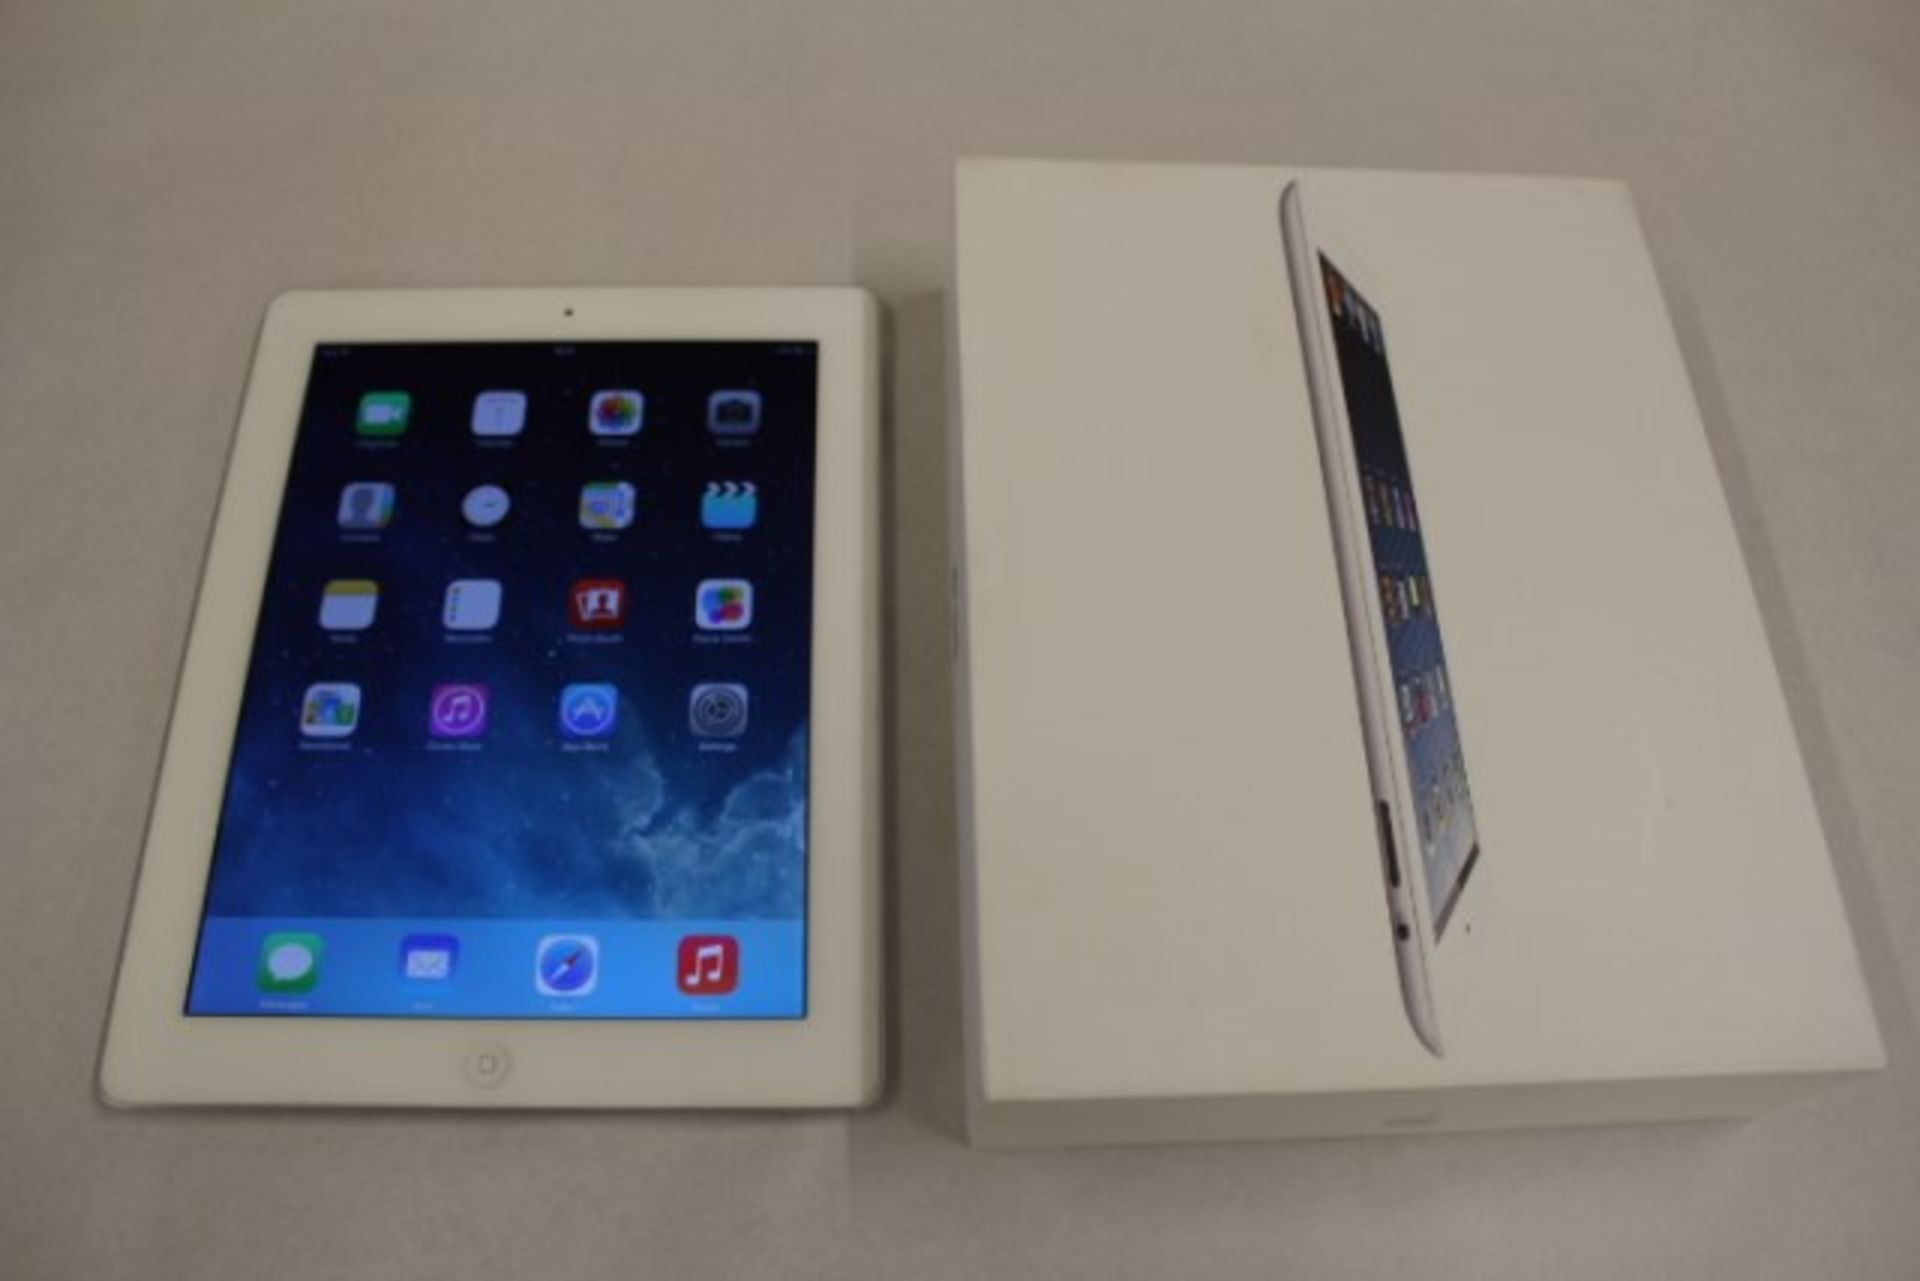 V  Grade A iPad 4 16Gb Black With Two Cameras/Retina Display With Charger In Original Box - - Image 3 of 4